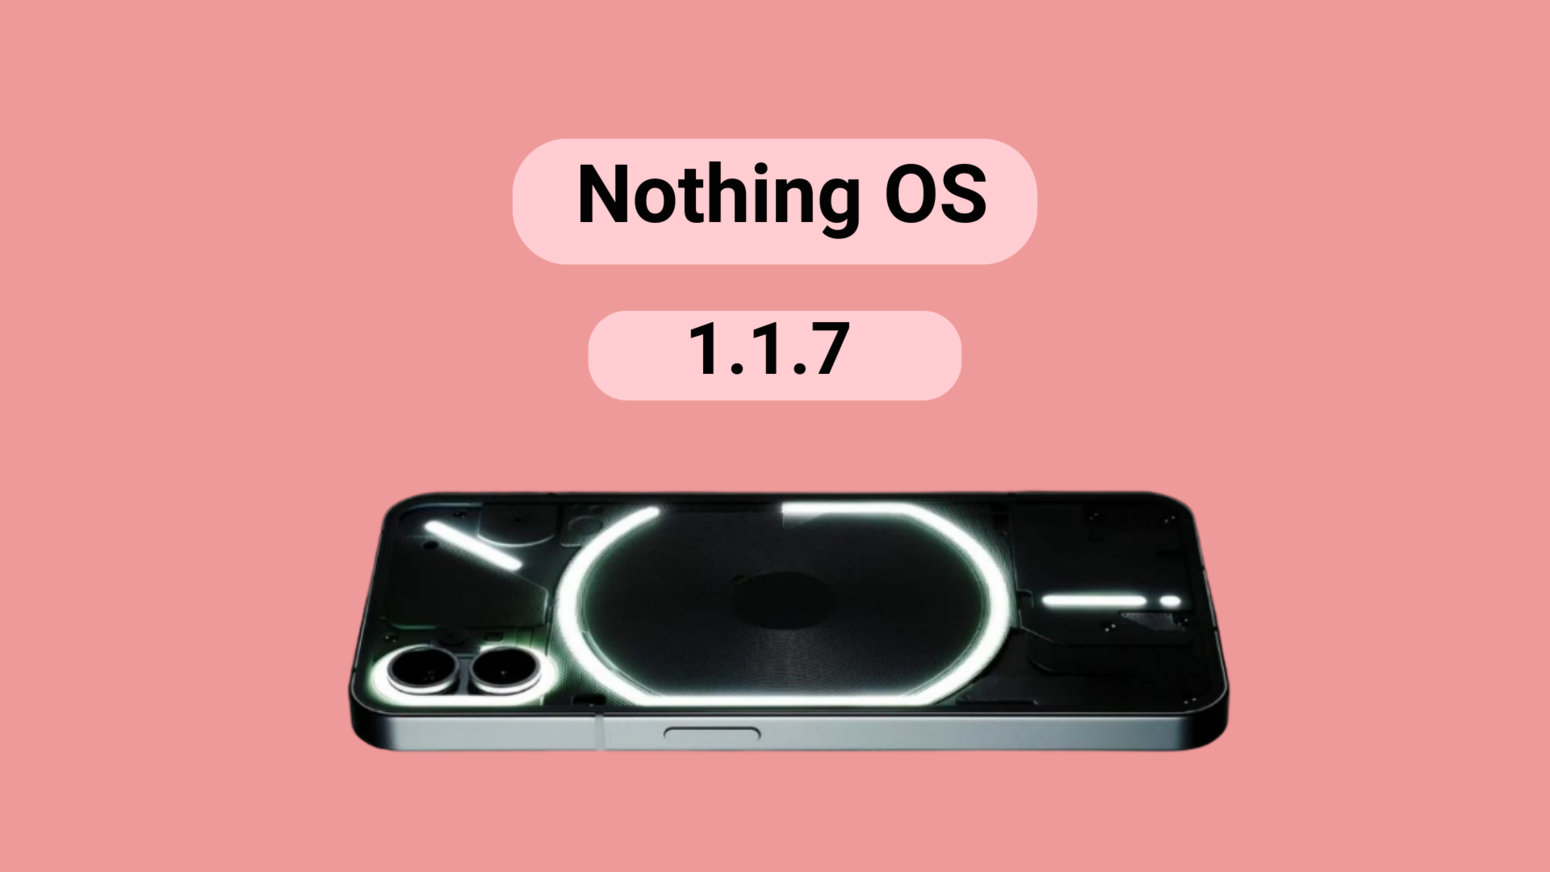 Download Nothing OS 1.1.7 Firmware Update